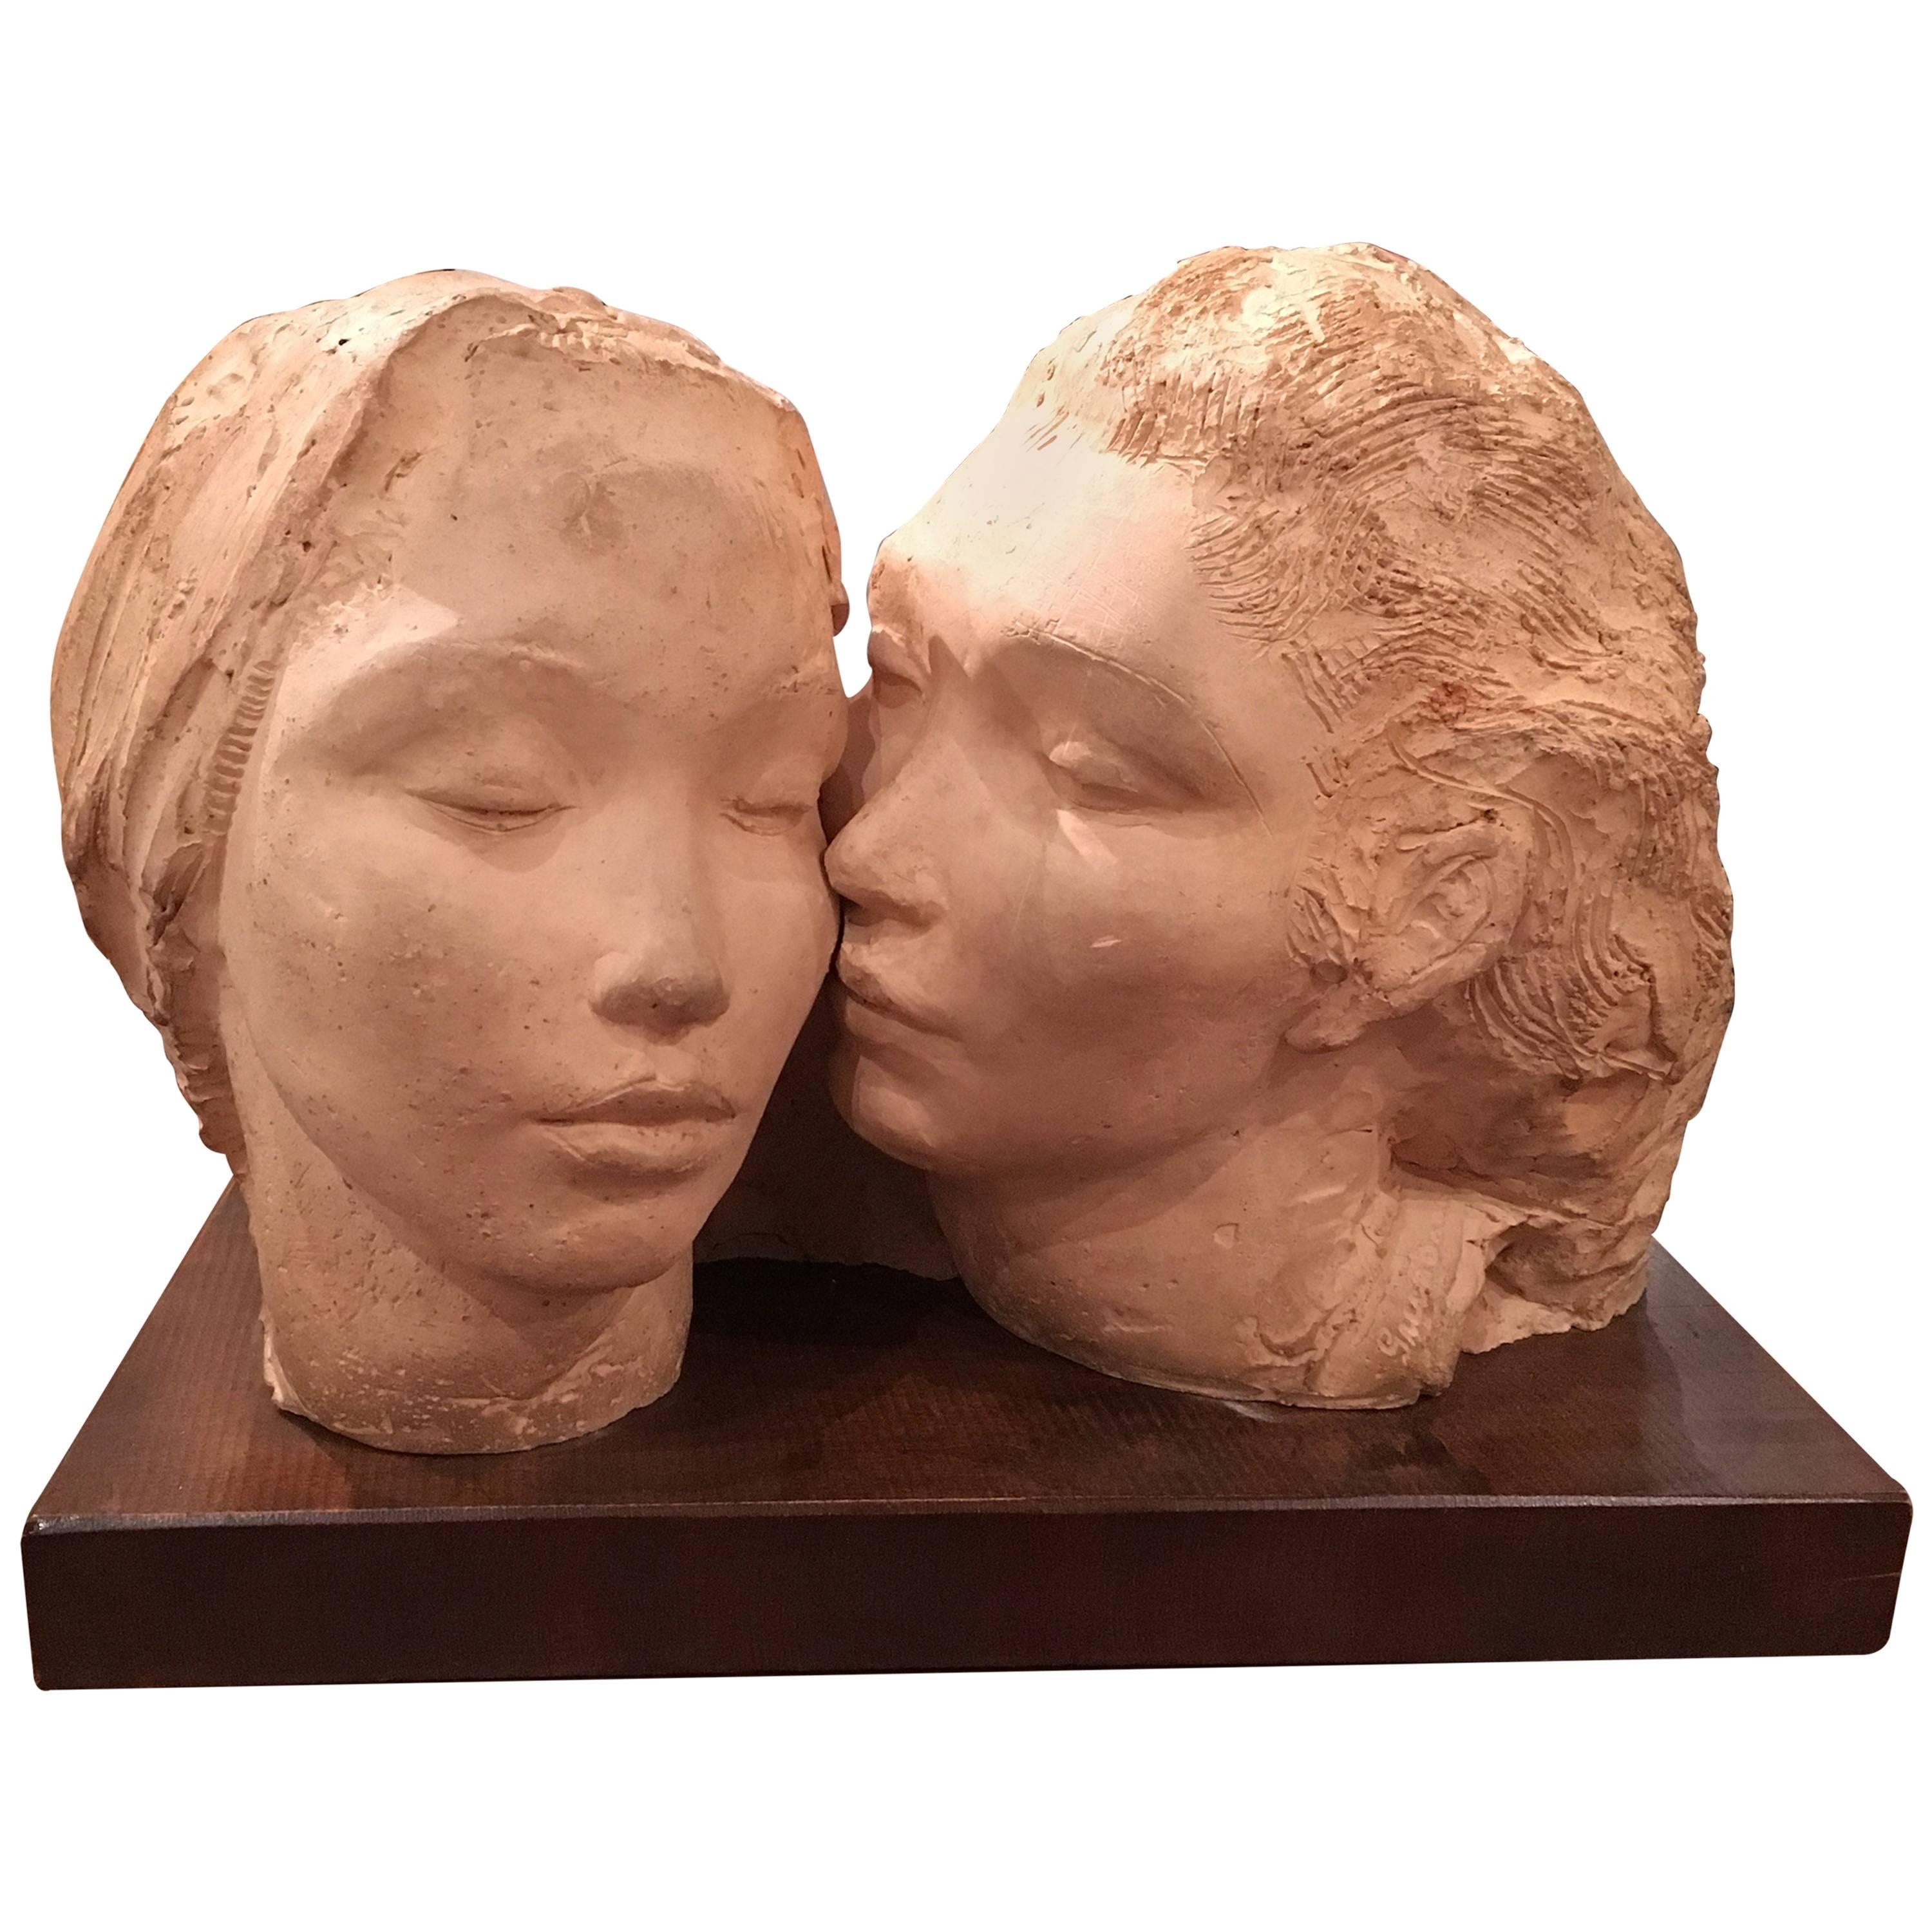 Stucco Sculpture of Two Women, by Dorothea Greenbaum